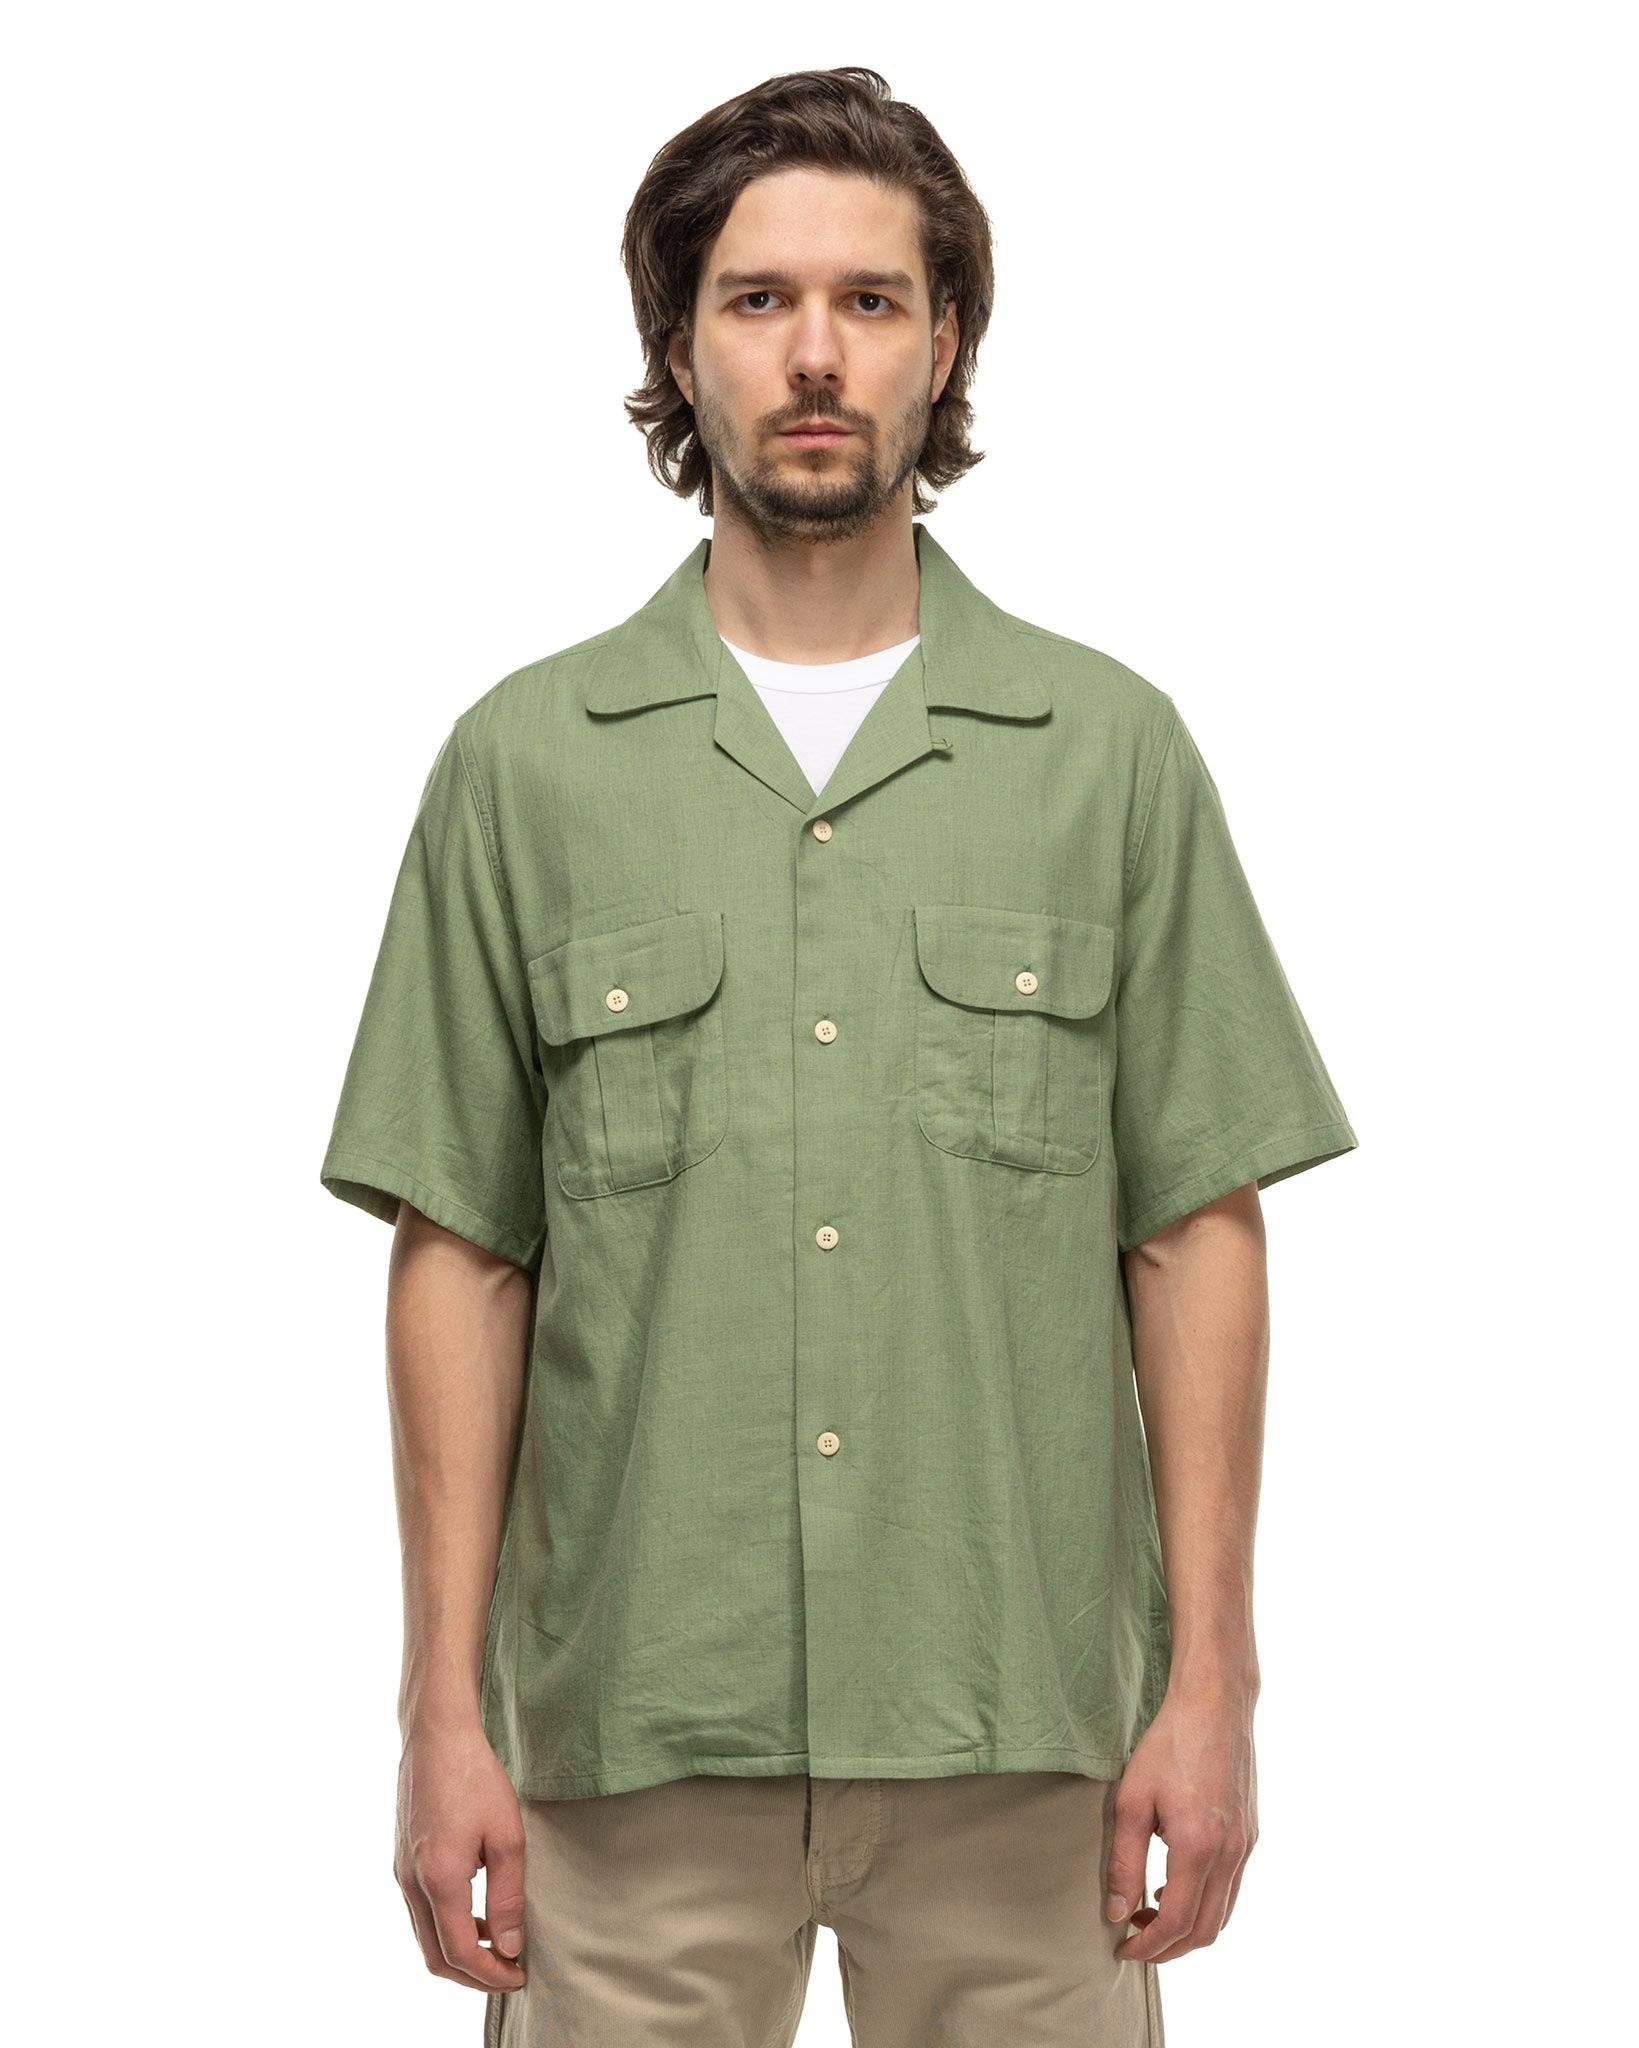 Keesey G.S. Shirt S/S Green - 4